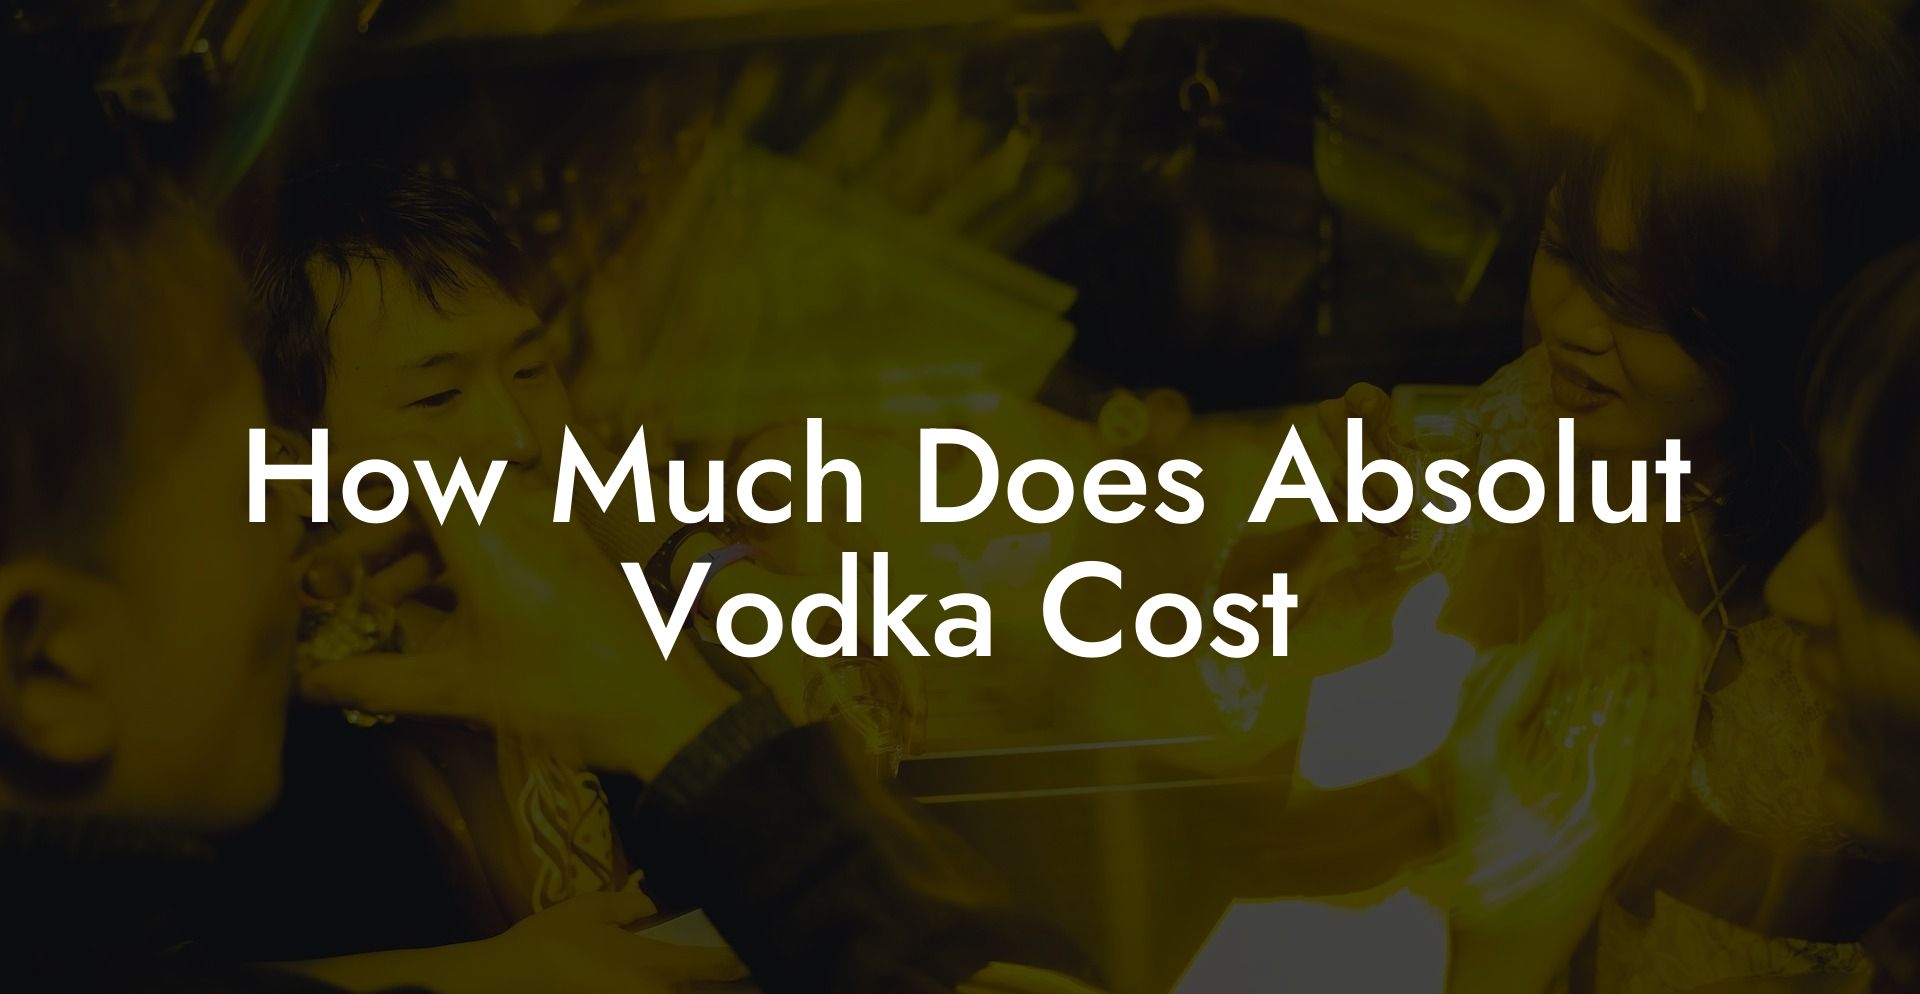 How Much Does Absolut Vodka Cost